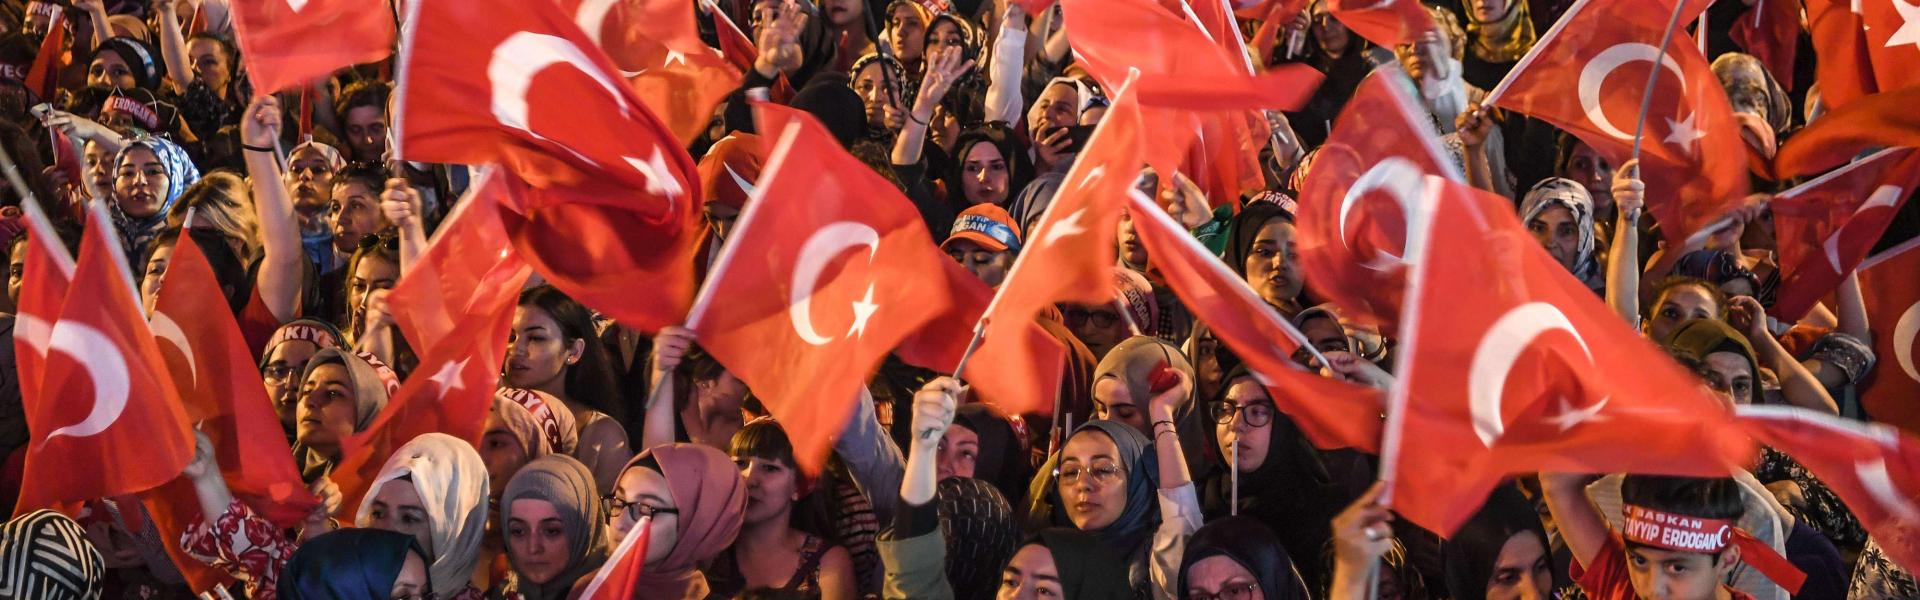 Families shattered in Turkey’s post-coup attempt crackdown - report 2